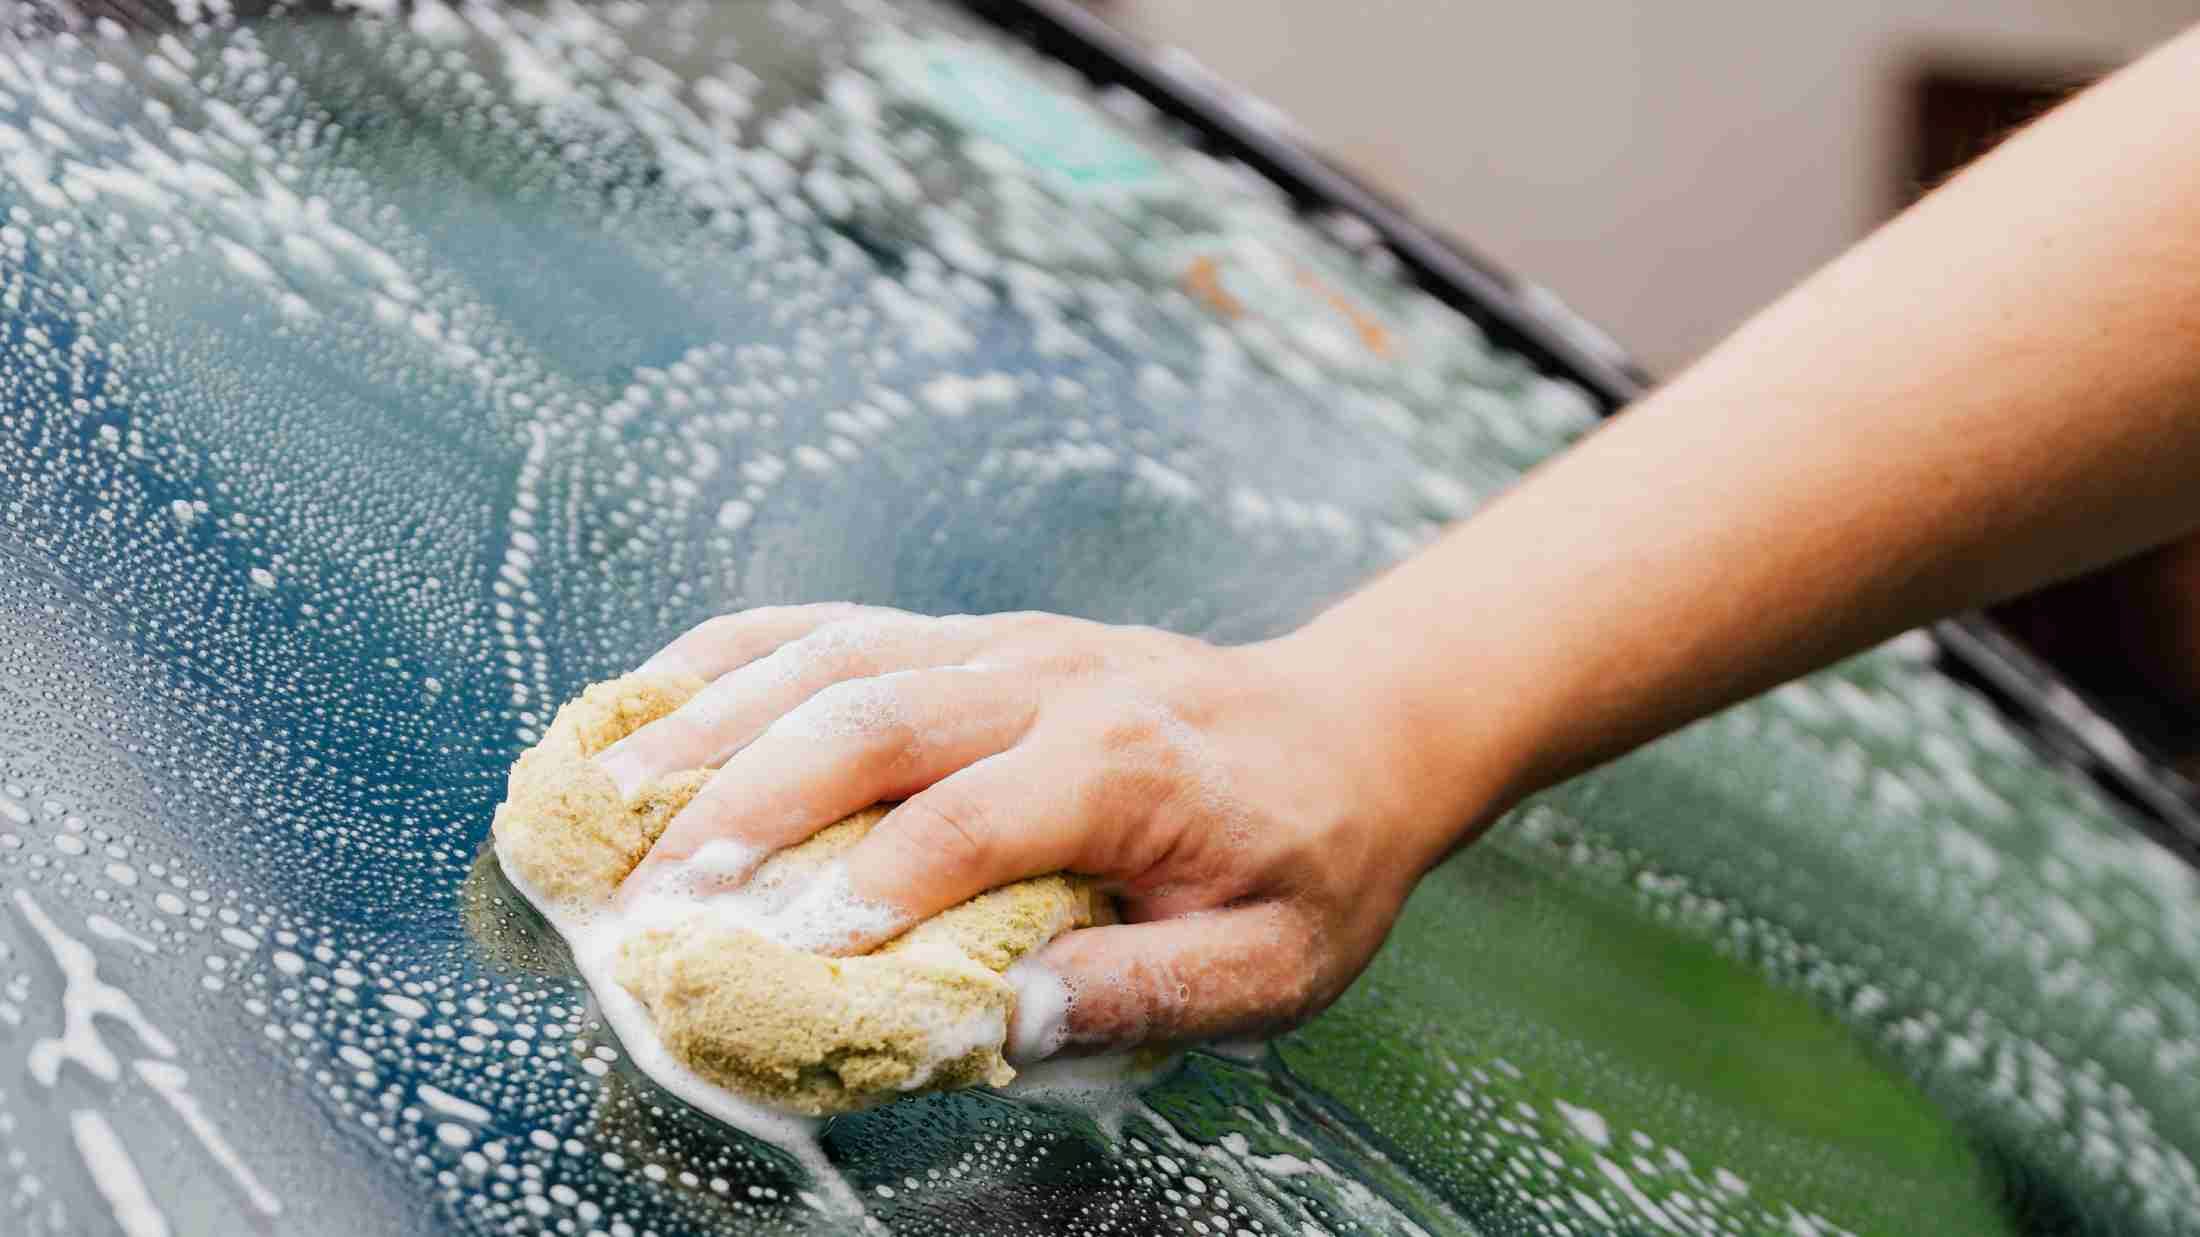 Cleaning a car window with soap and a sponge